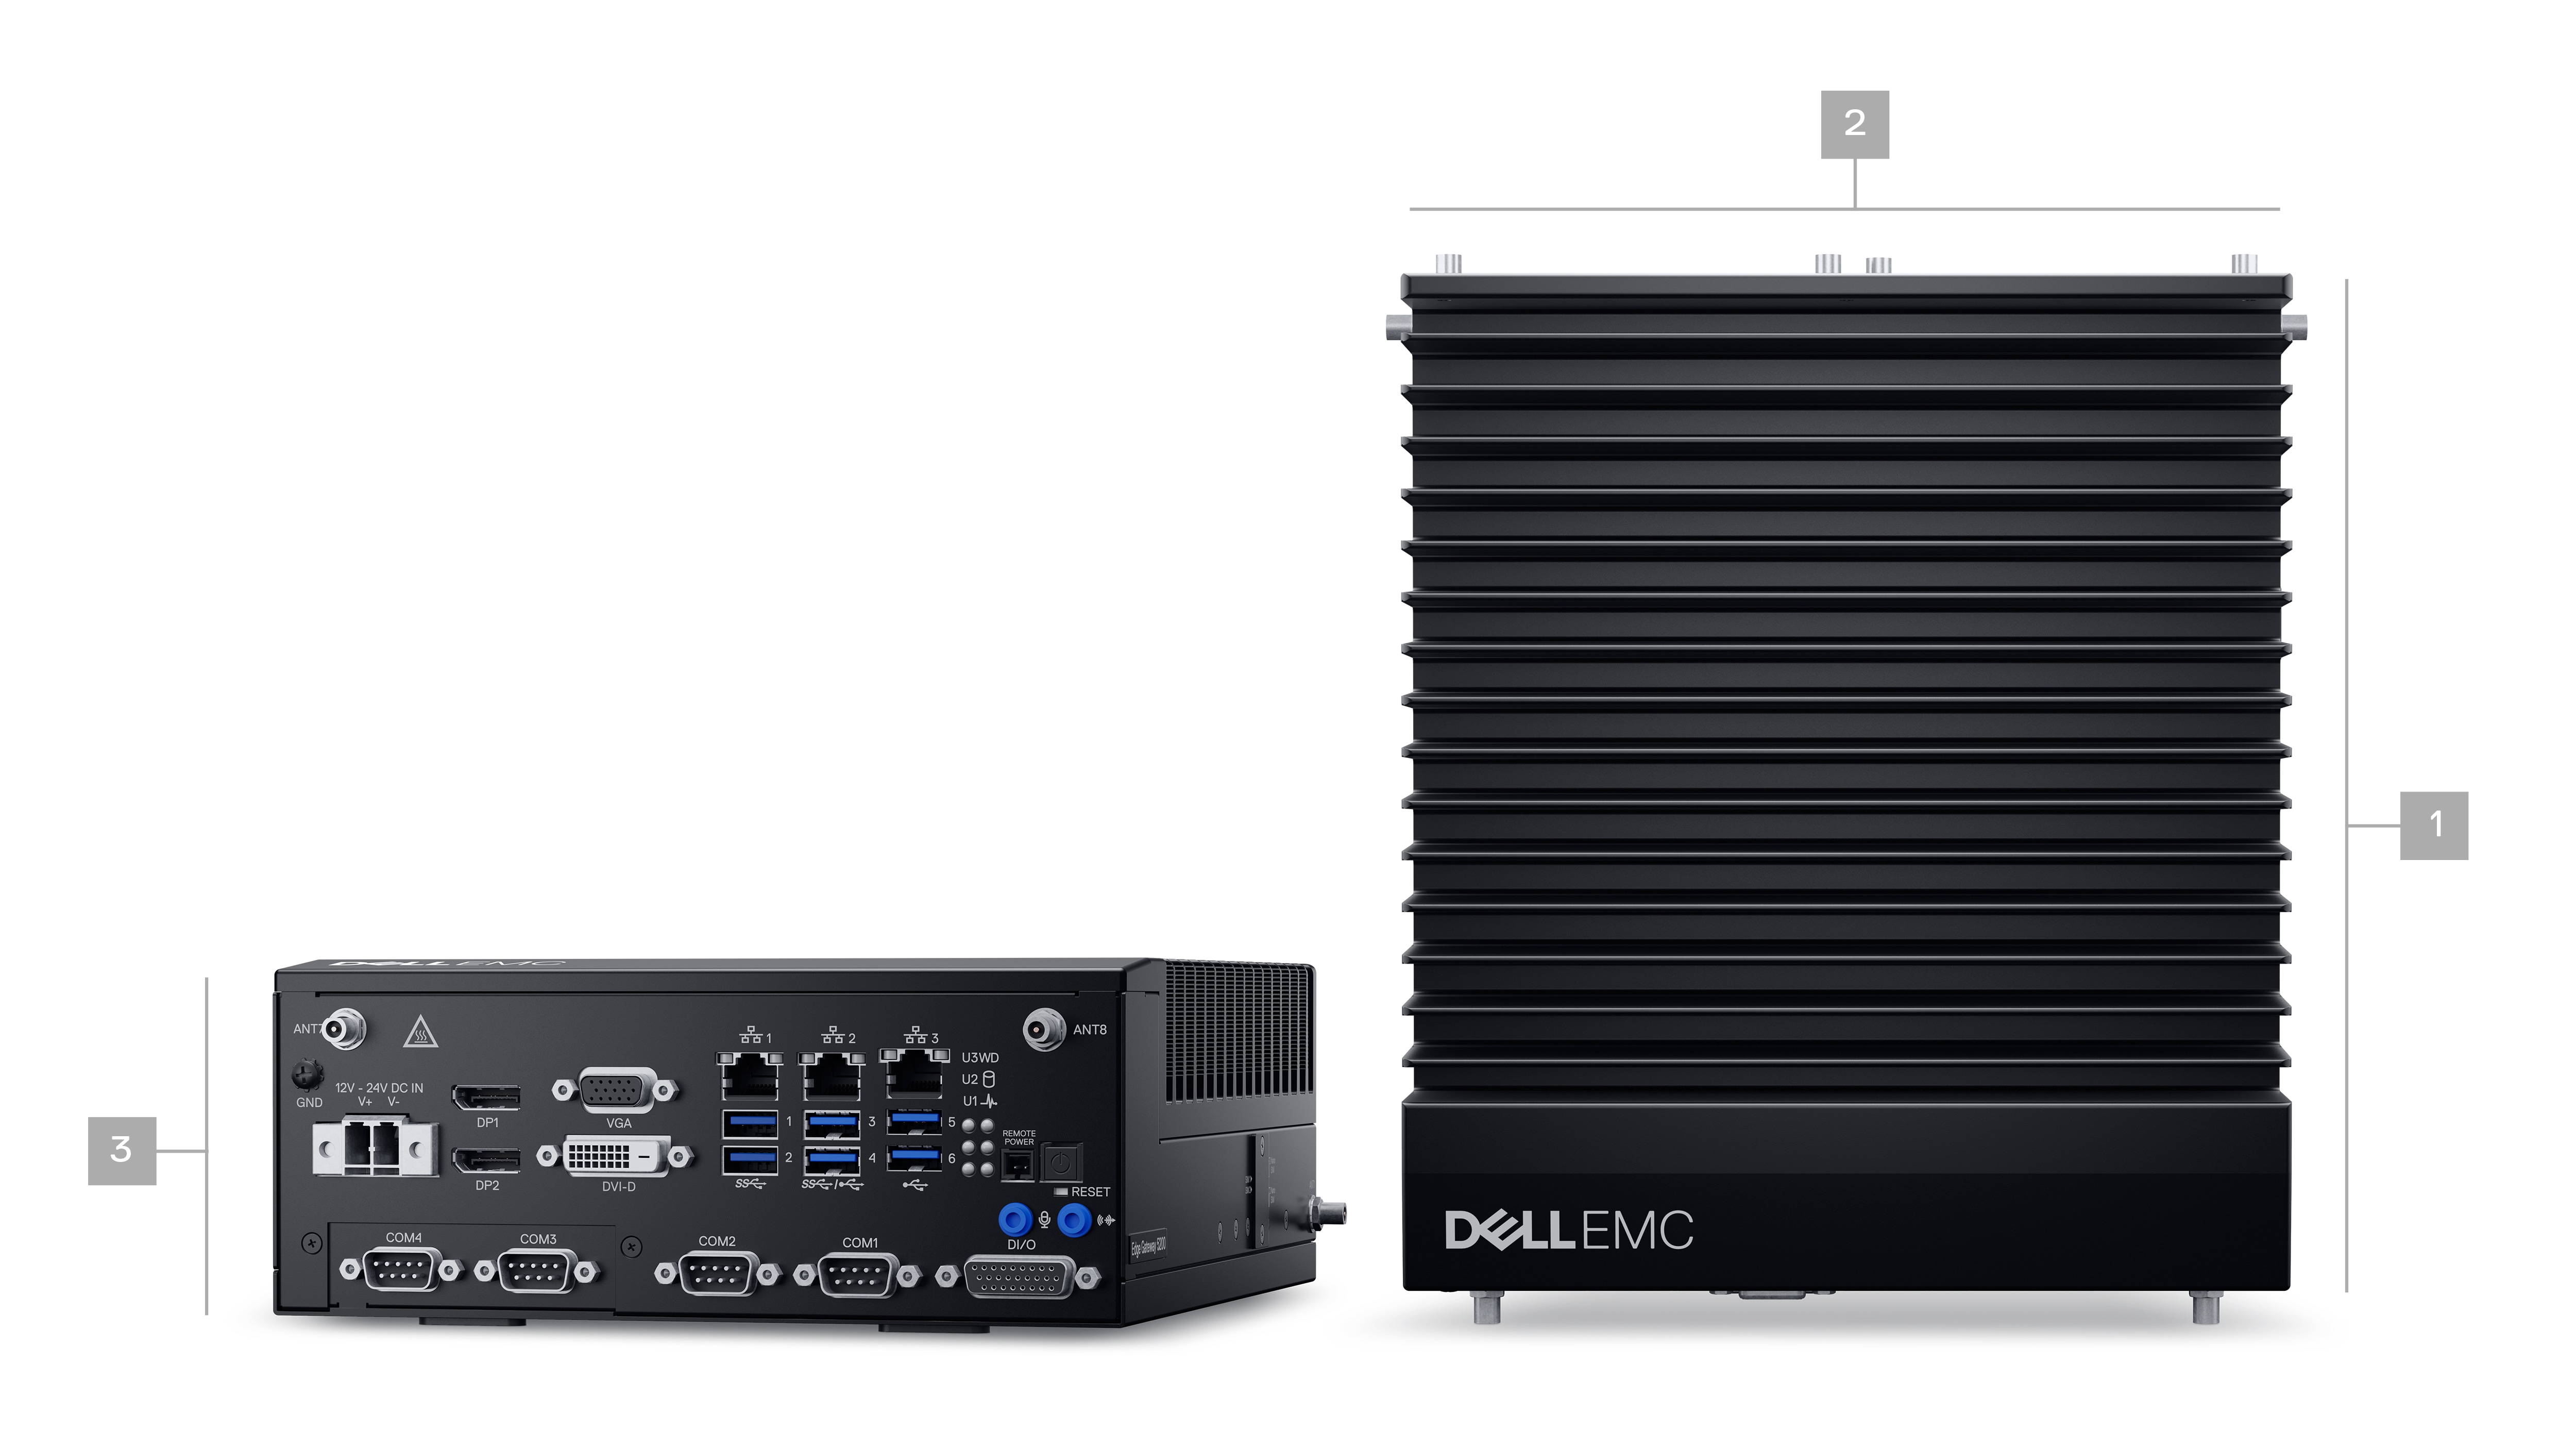 Picture of two Dell EMC Edge Gateway 5200 with numbers 1 to 3 signaling product dimensions & weight.